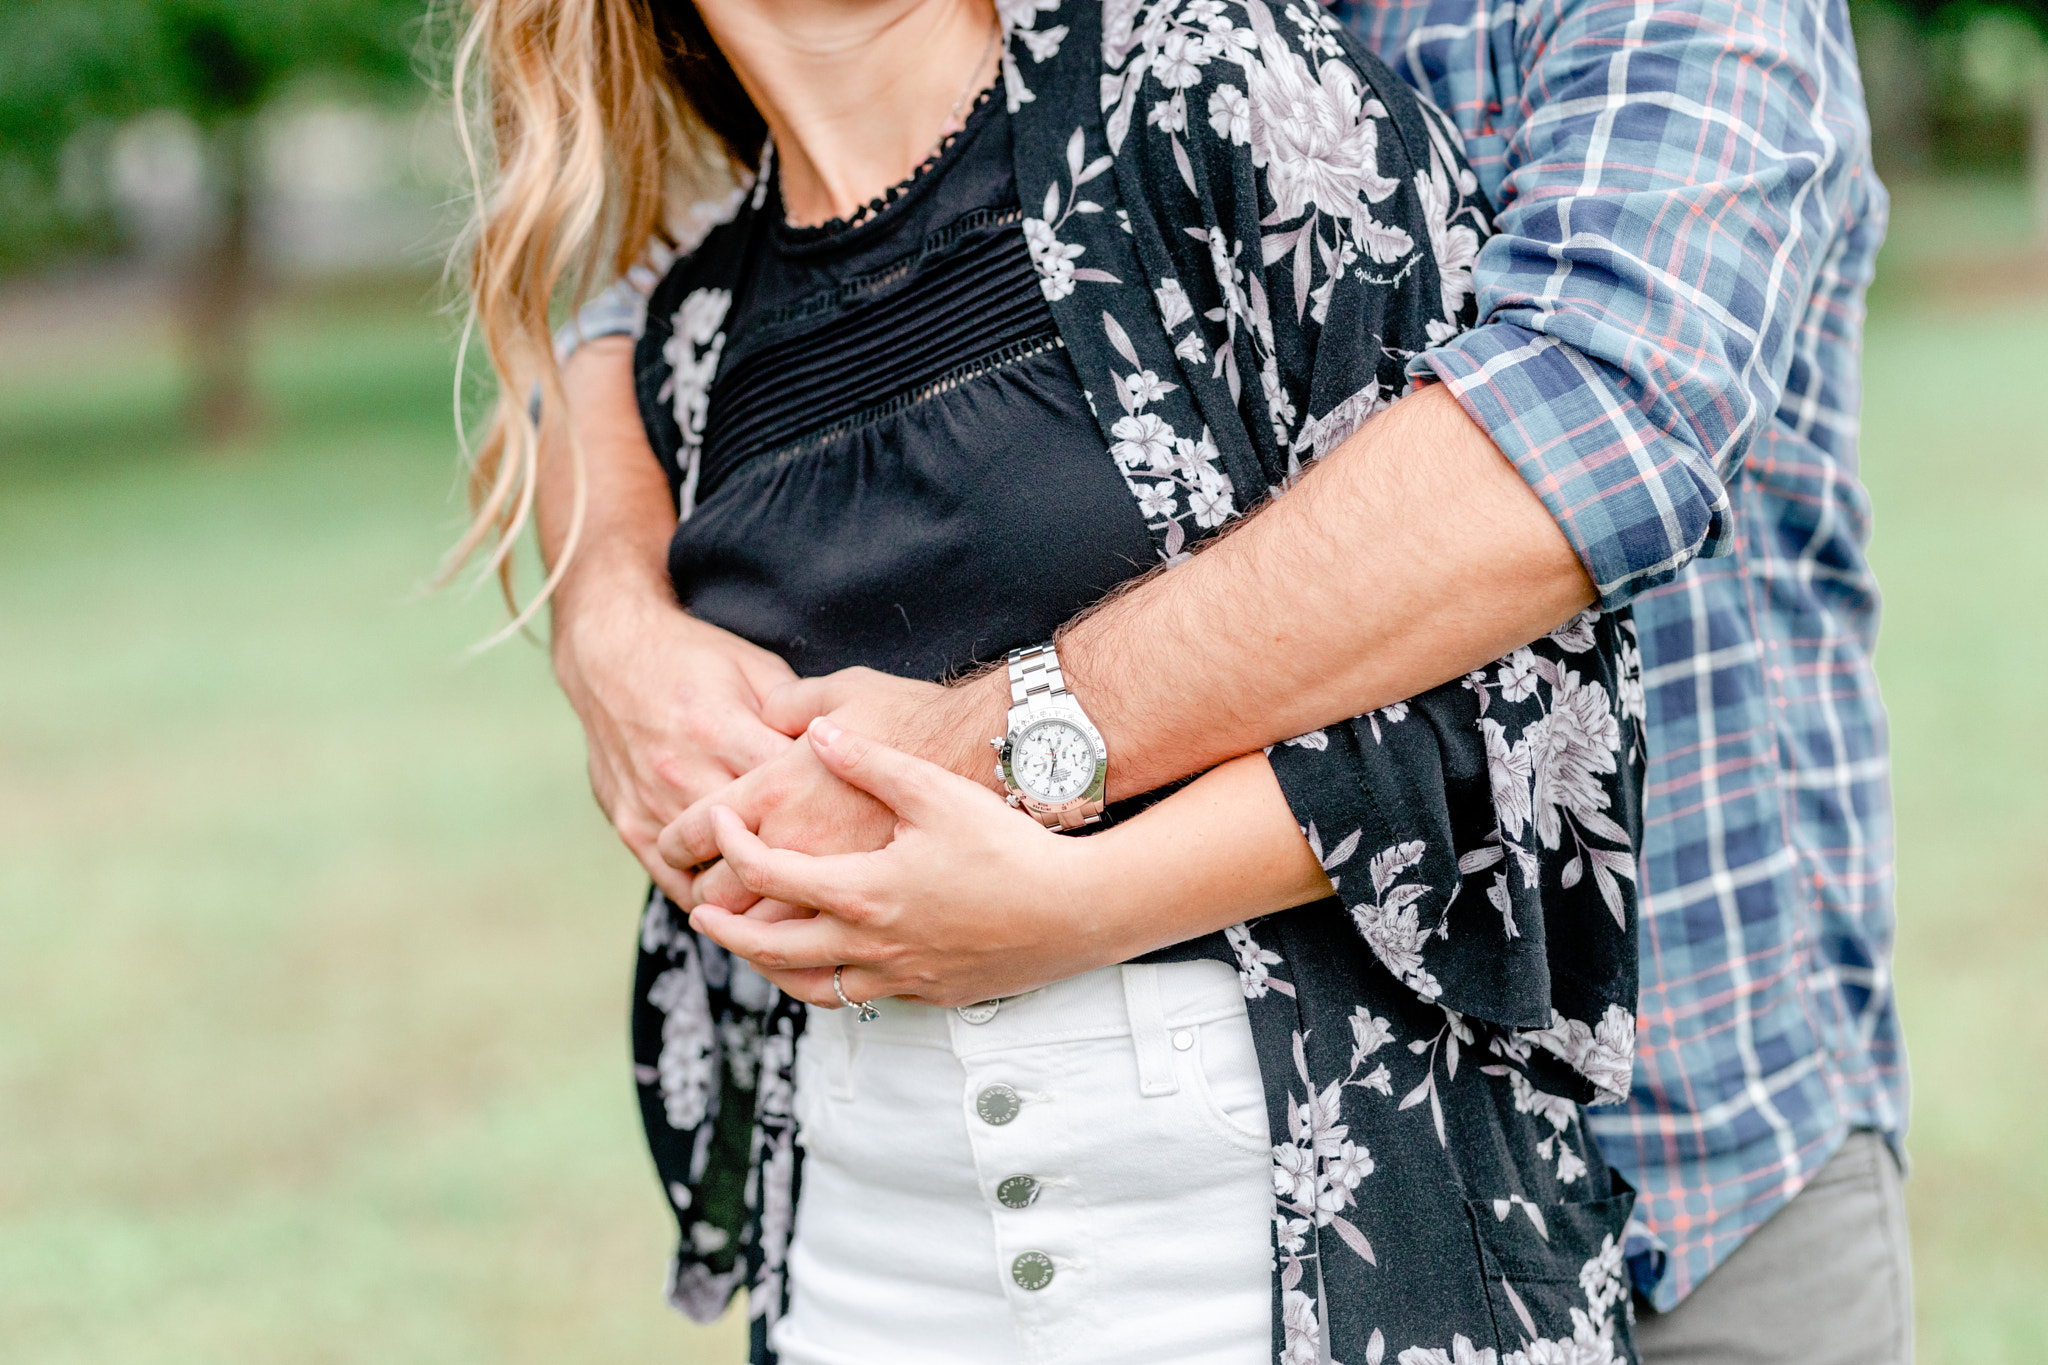 WRAL gardens engagement session